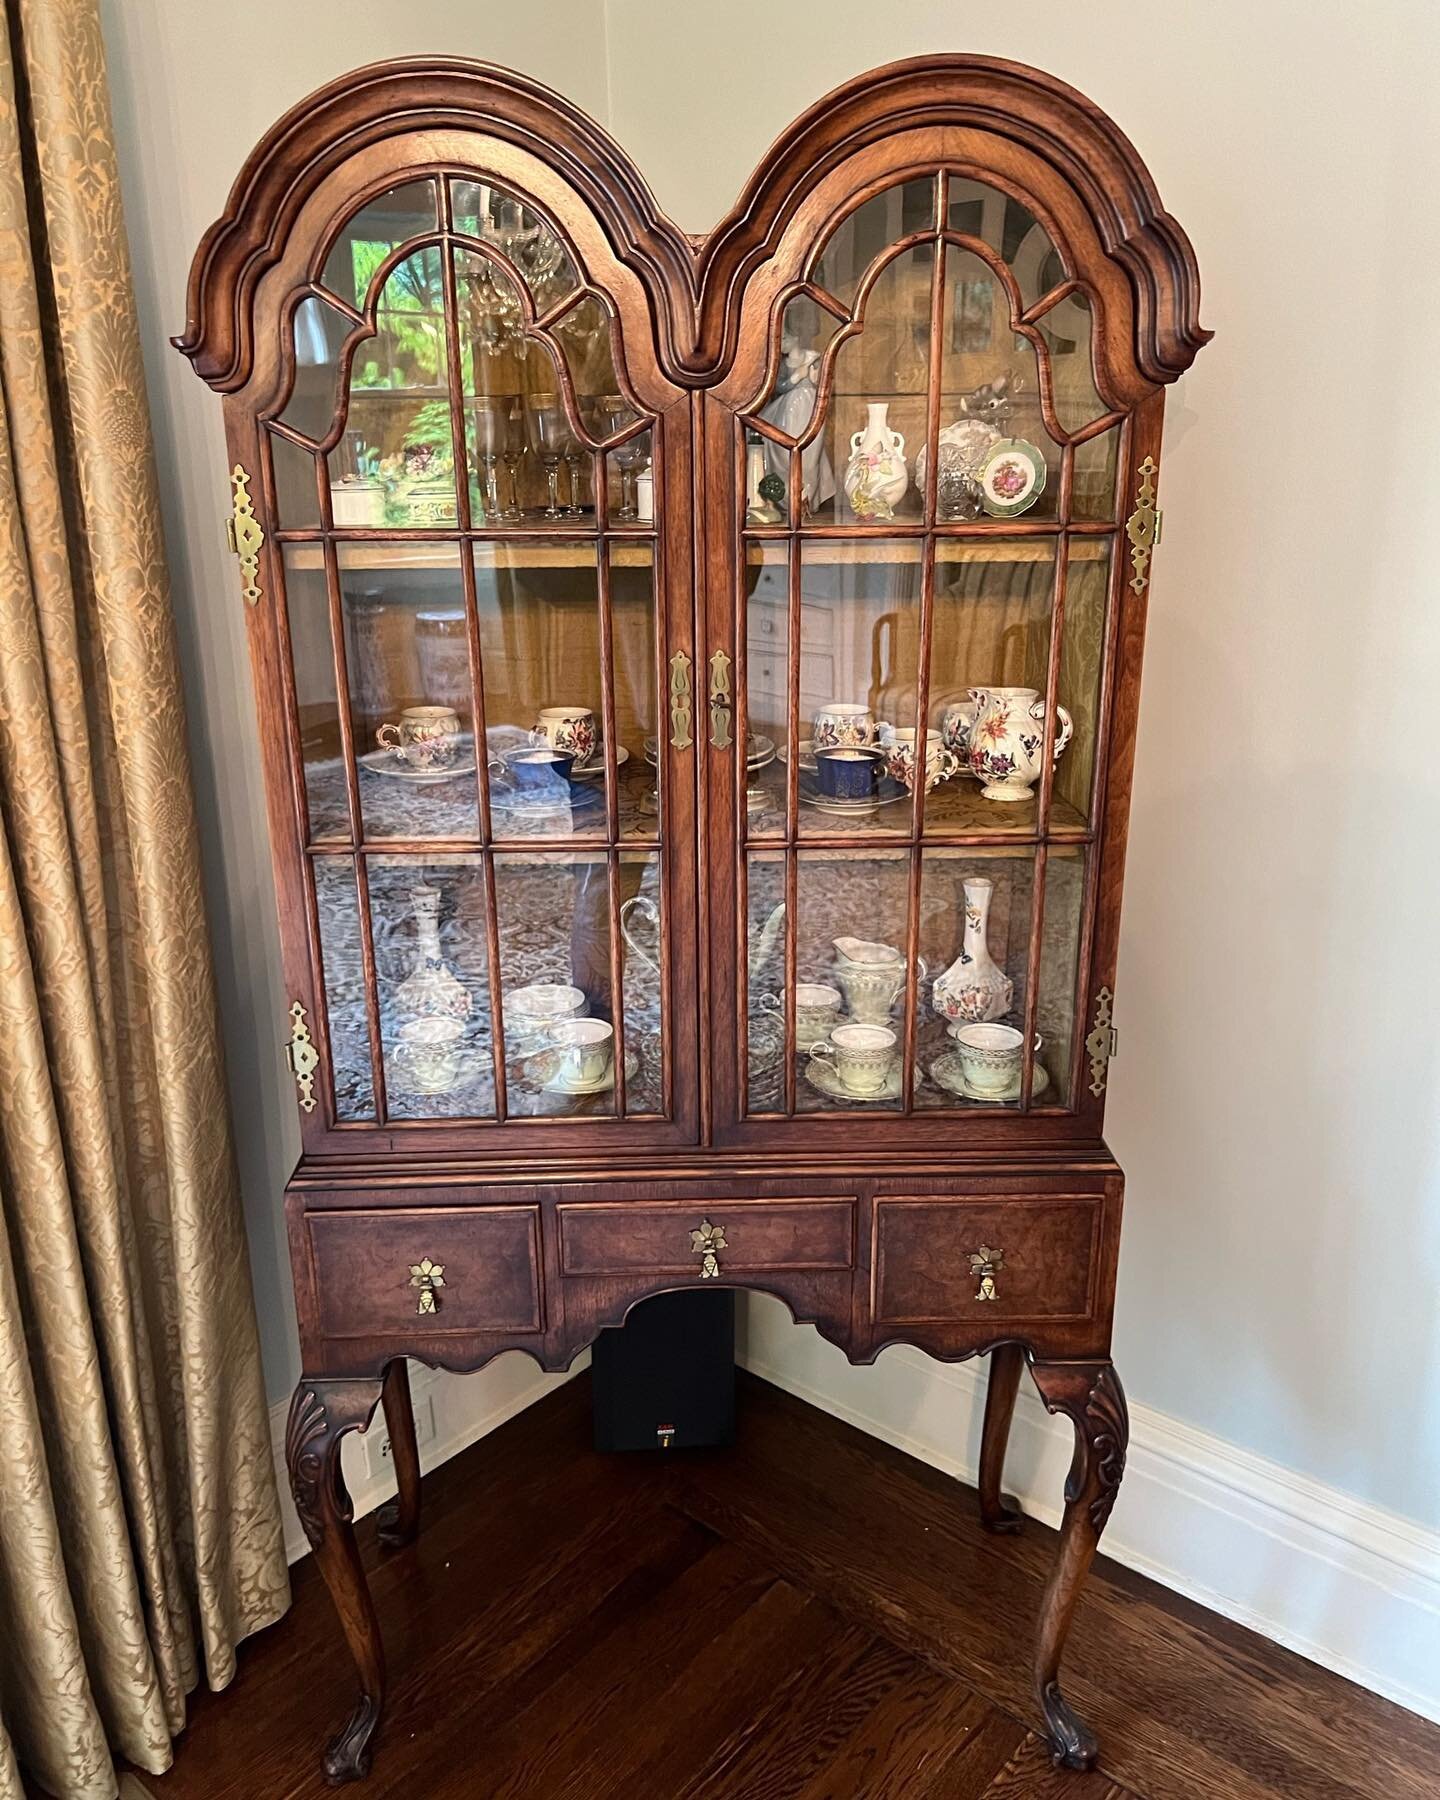 Antique Cabinet/Curio
Silk or Fabric Lined. 3 Drawers with brass hinges &amp; Lock with Key 14.5d x 33w x 65.5h
$675. Part of an Estate Sale in Historical Summit home. #emptyyournest #diningroom #antique #antiques #antiquecabinet #interiordesign #int